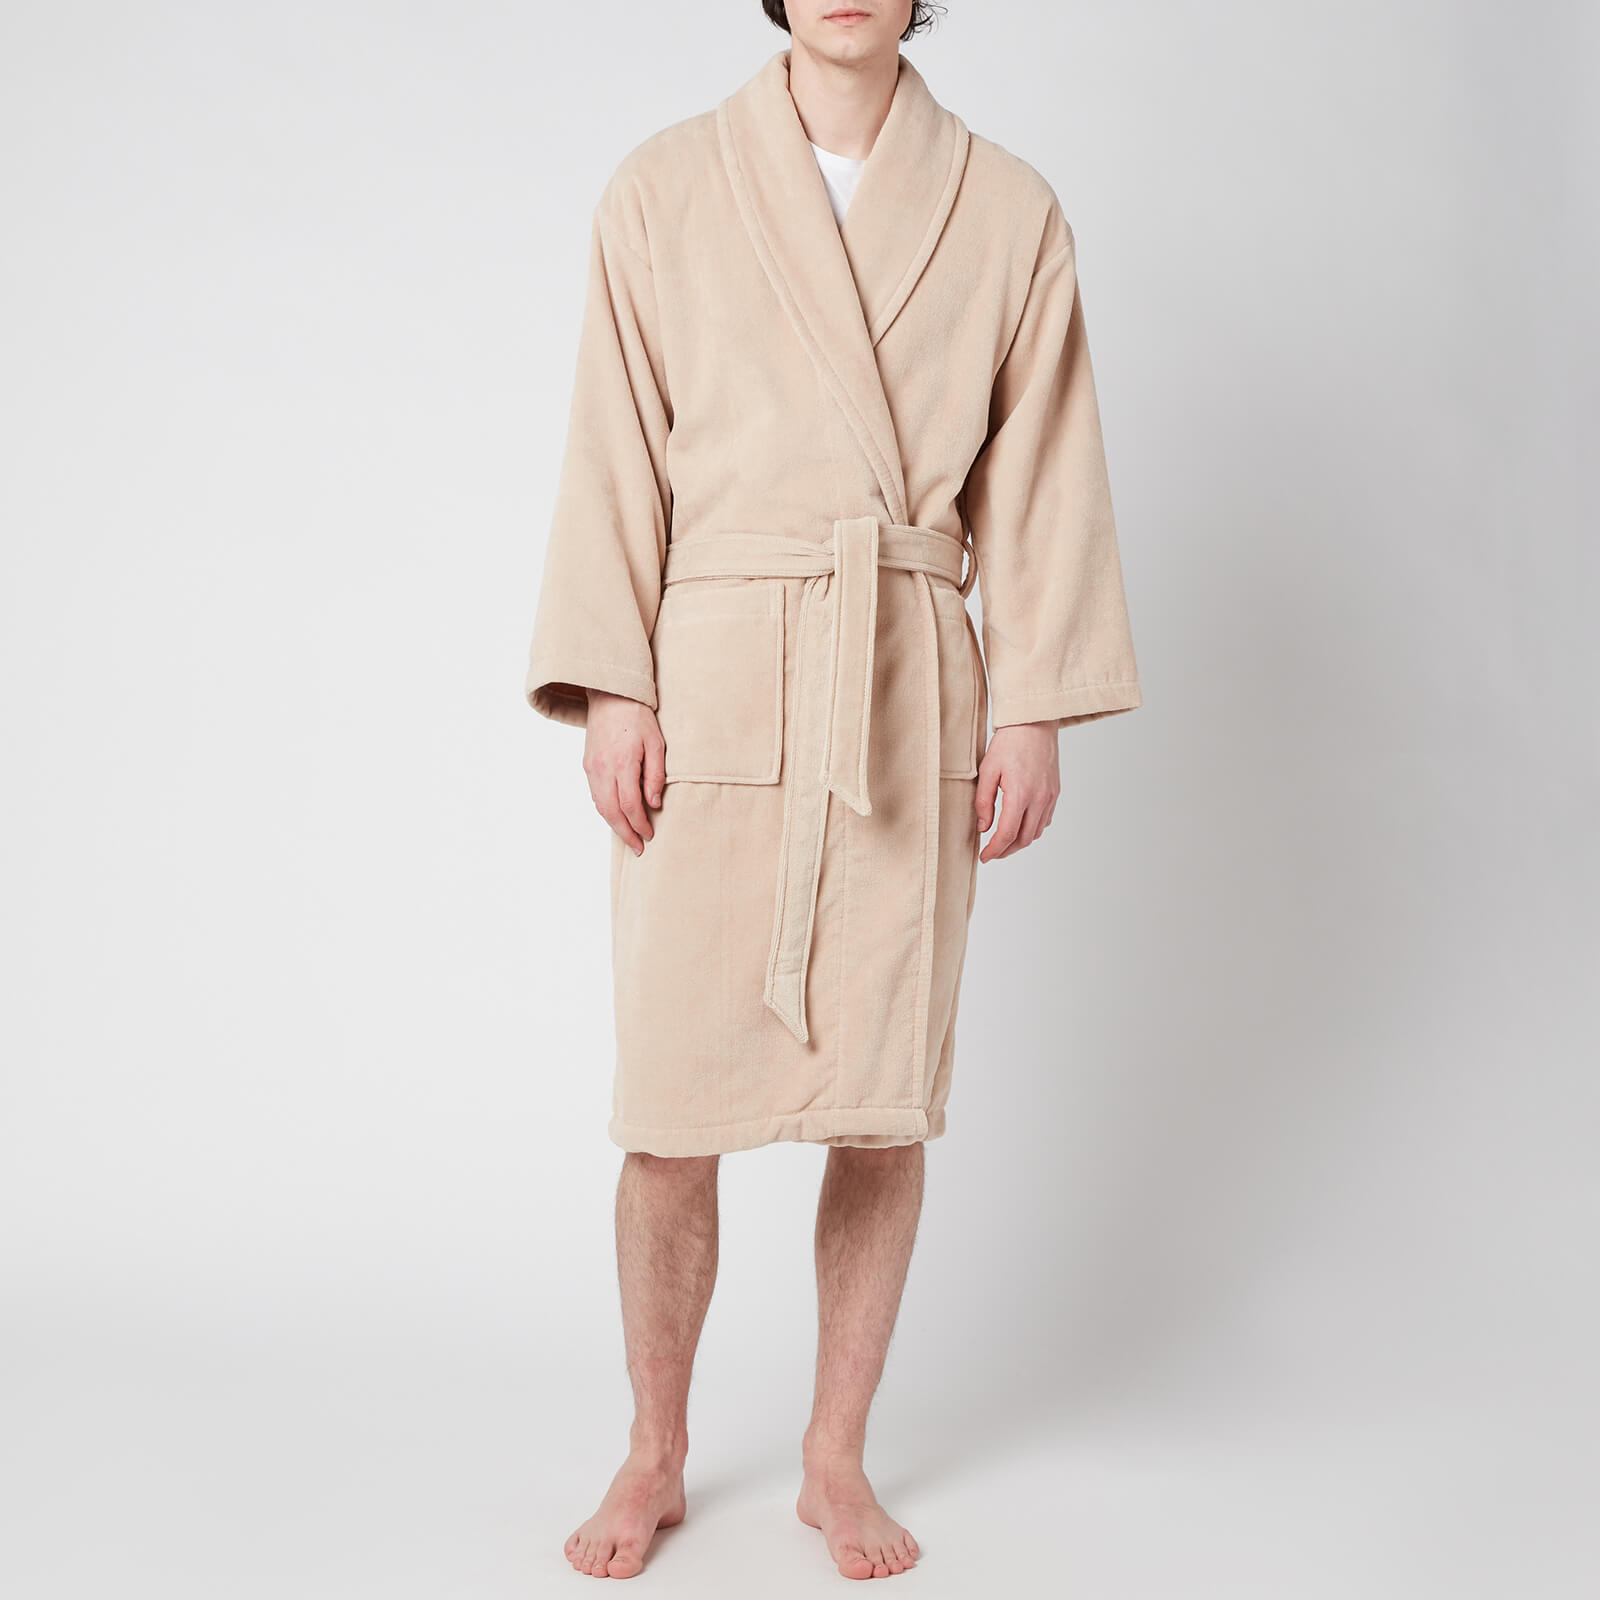 Christy Supreme Velour Cotton Dressing Gown - Stone - S